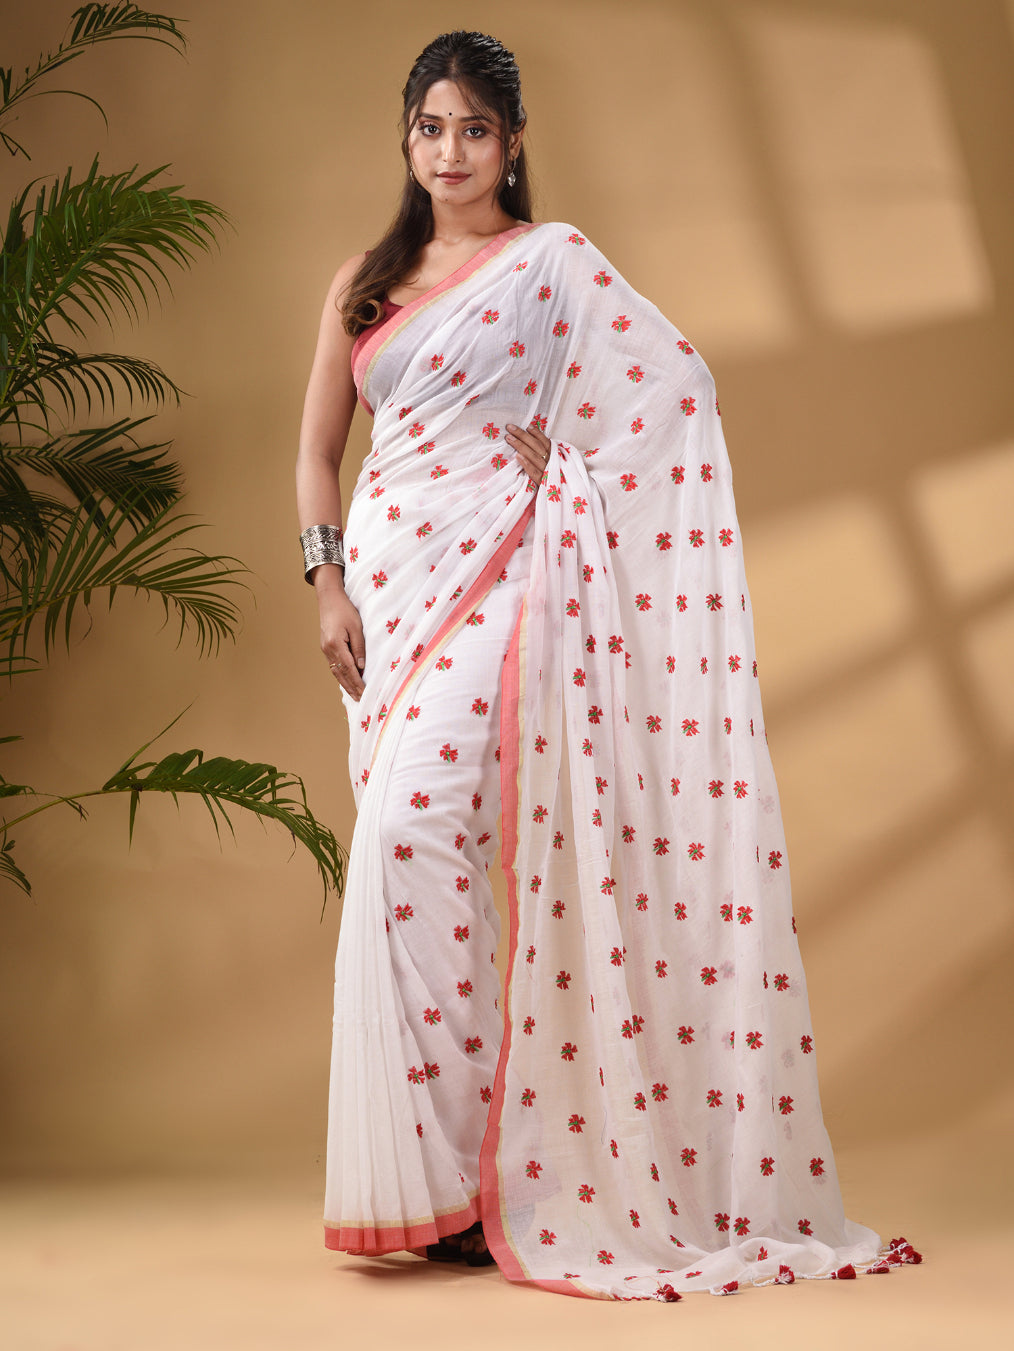 White Cotton Handwoven Soft Saree With Floral Motifs